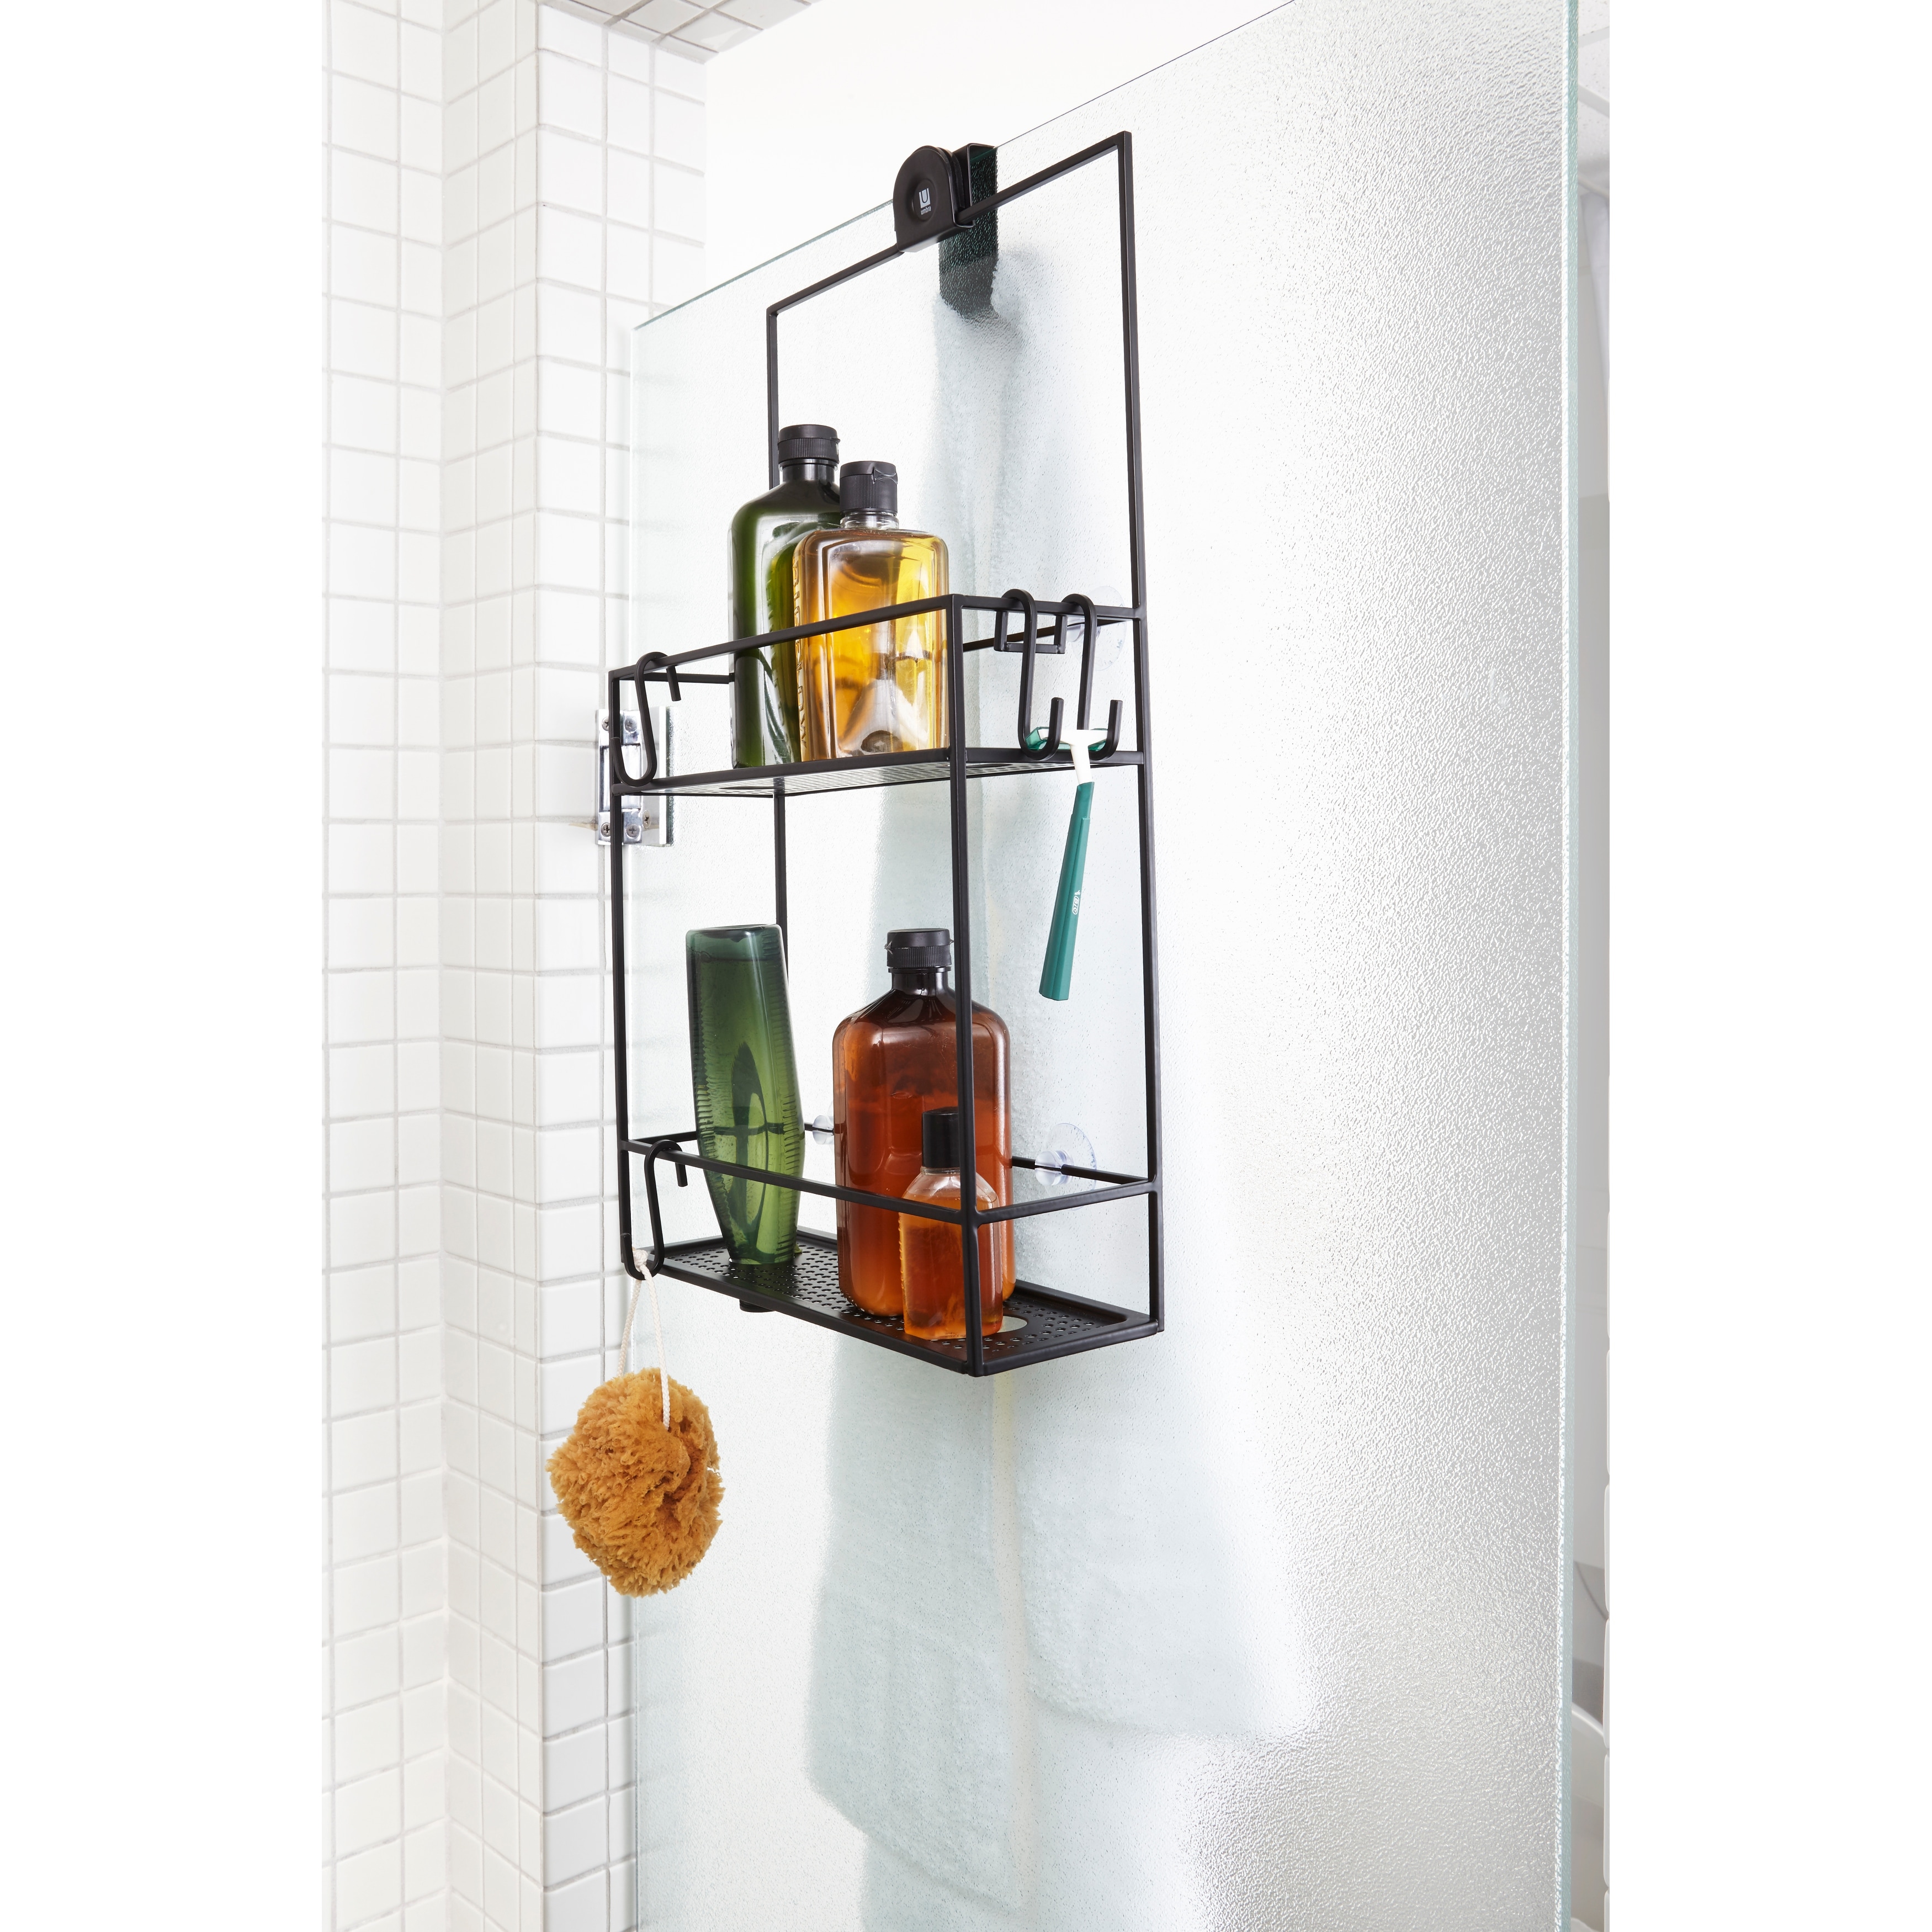 https://ak1.ostkcdn.com/images/products/is/images/direct/51f12db3a590865b5cb76b9e1ed6e816750d477b/Umbra-CUBIKO-Shower-Caddy.jpg